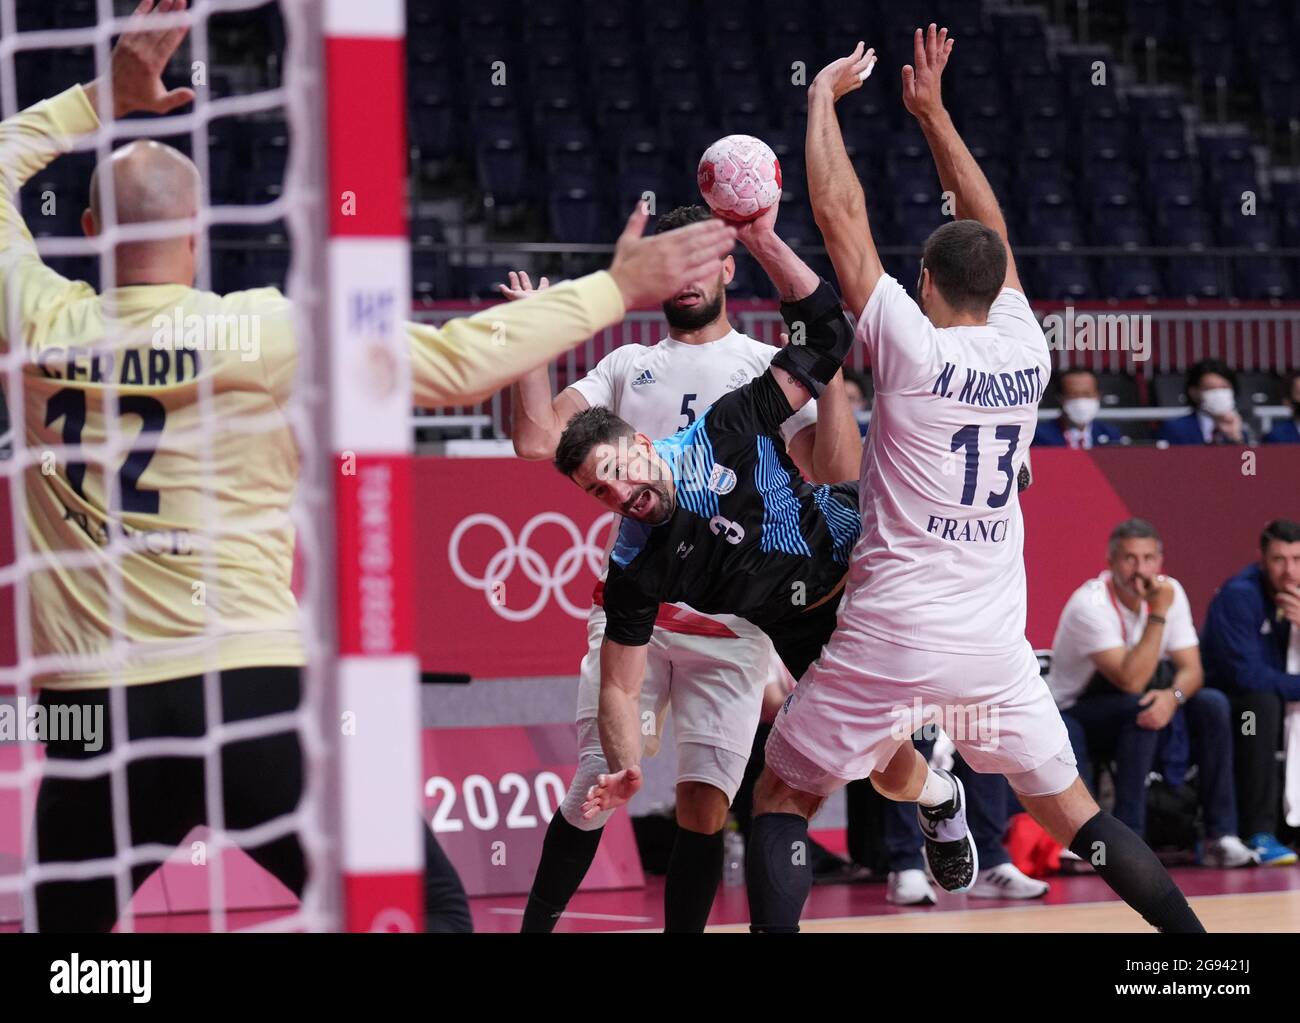 Tokyo, Japan. 24th July, 2021. Federico Pizarro (2nd R) of Argentina shoots during the men's handball preliminary round Group A match between France and Argentina in Tokyo, Japan, July 24, 2021. Credit: Meng Yongmin/Xinhua/Alamy Live News Stock Photo